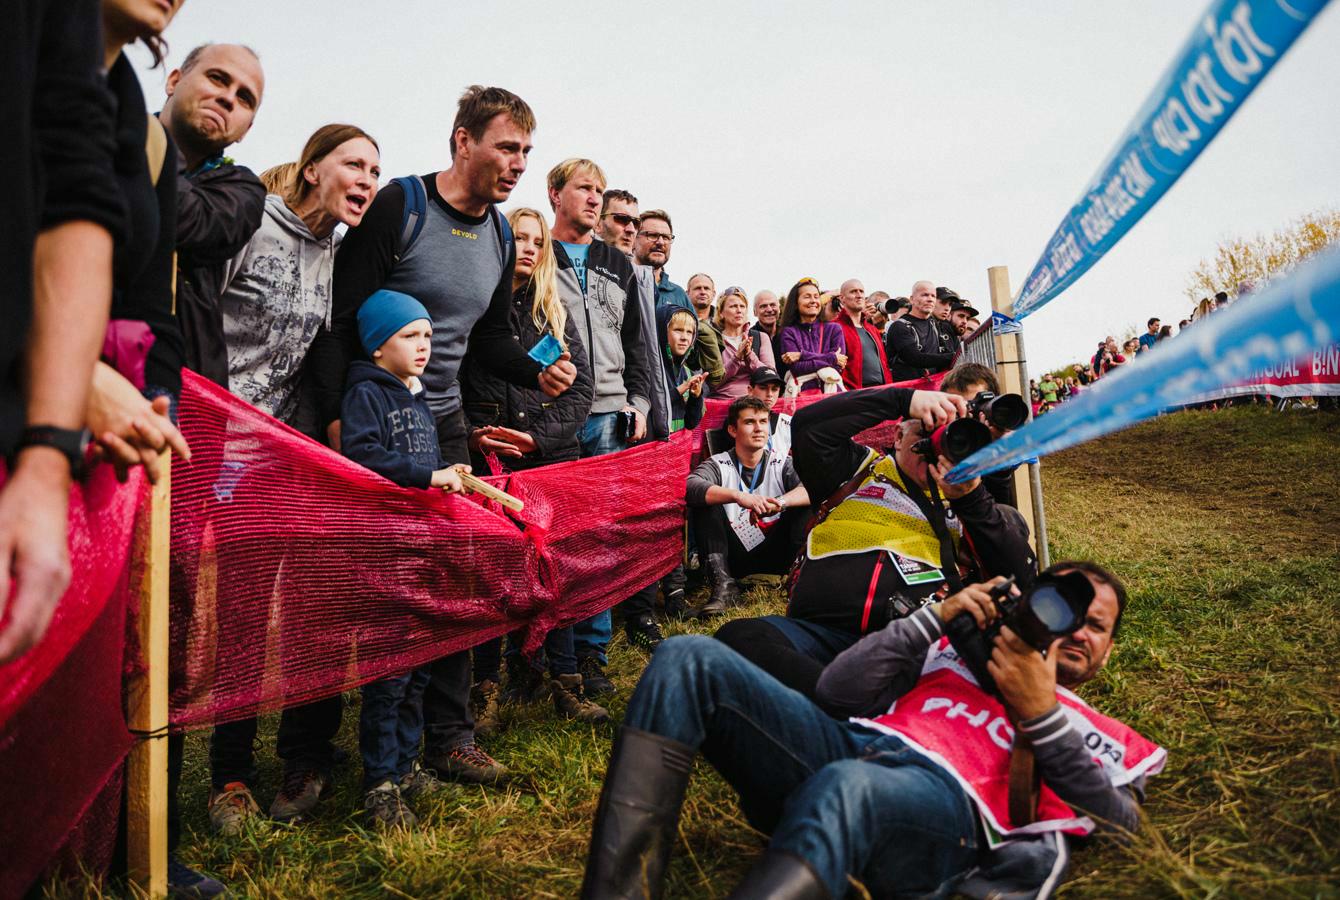 Will you be at the cyclo-cross World Championships in Tabor?